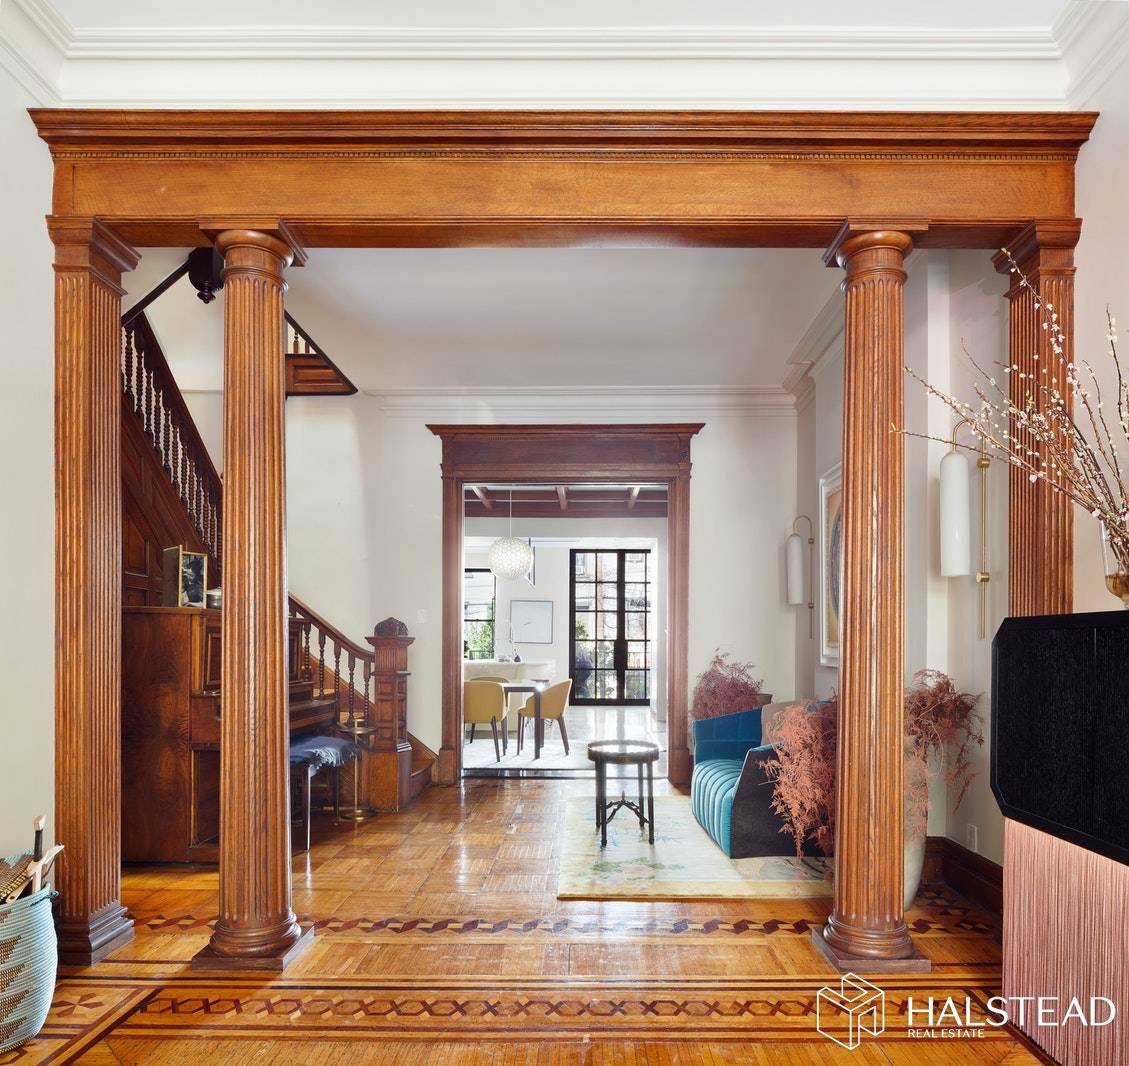 With stunning original architectural detail and historic provenance, this 1901 Romanesque Revival mansion has undergone a complete top to bottom renovation that both respects and honors the property's pre war ...